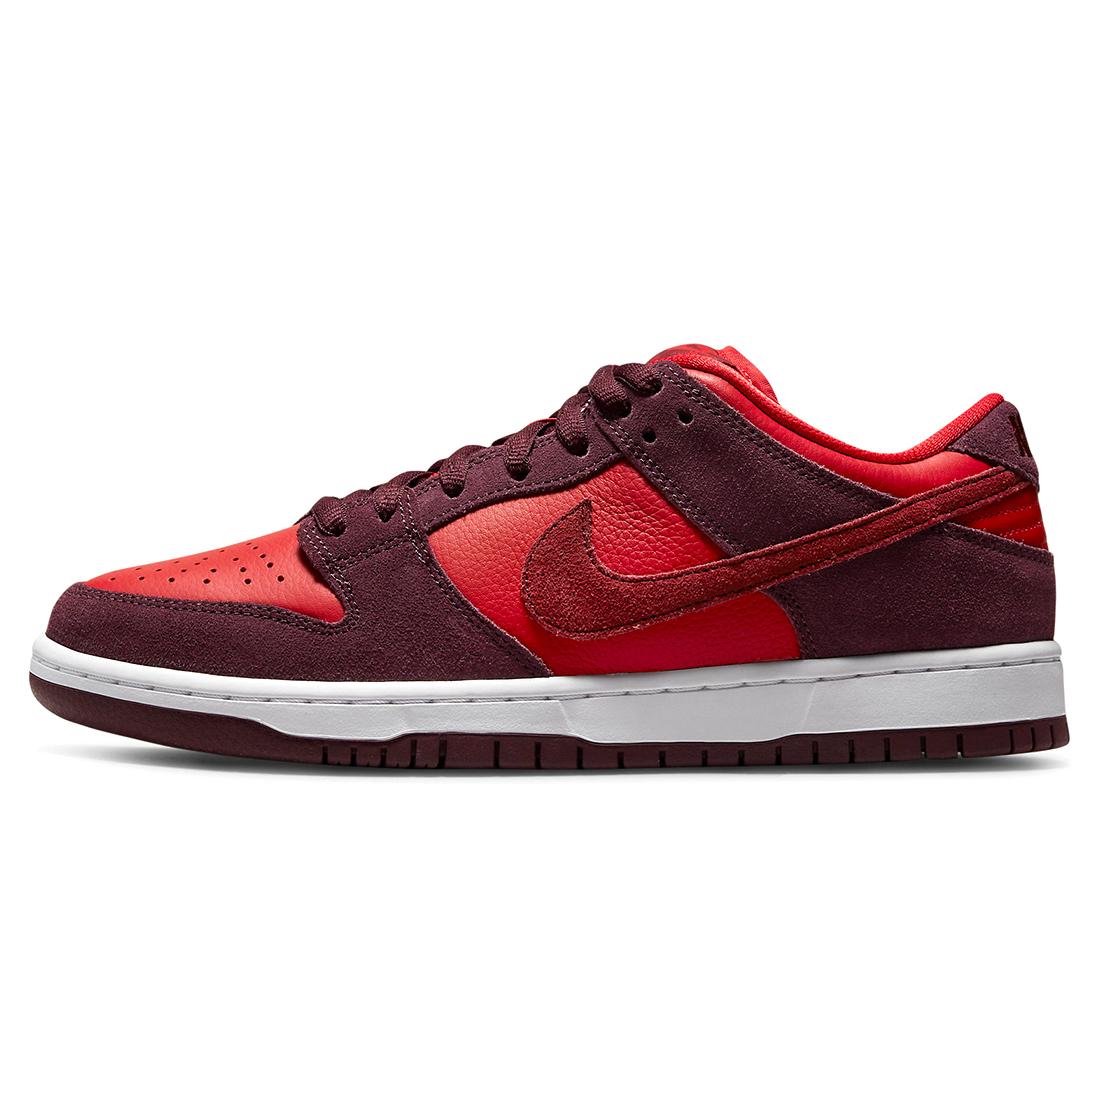 Nike Dunk Low Pro SB Fruity Pack Cherry